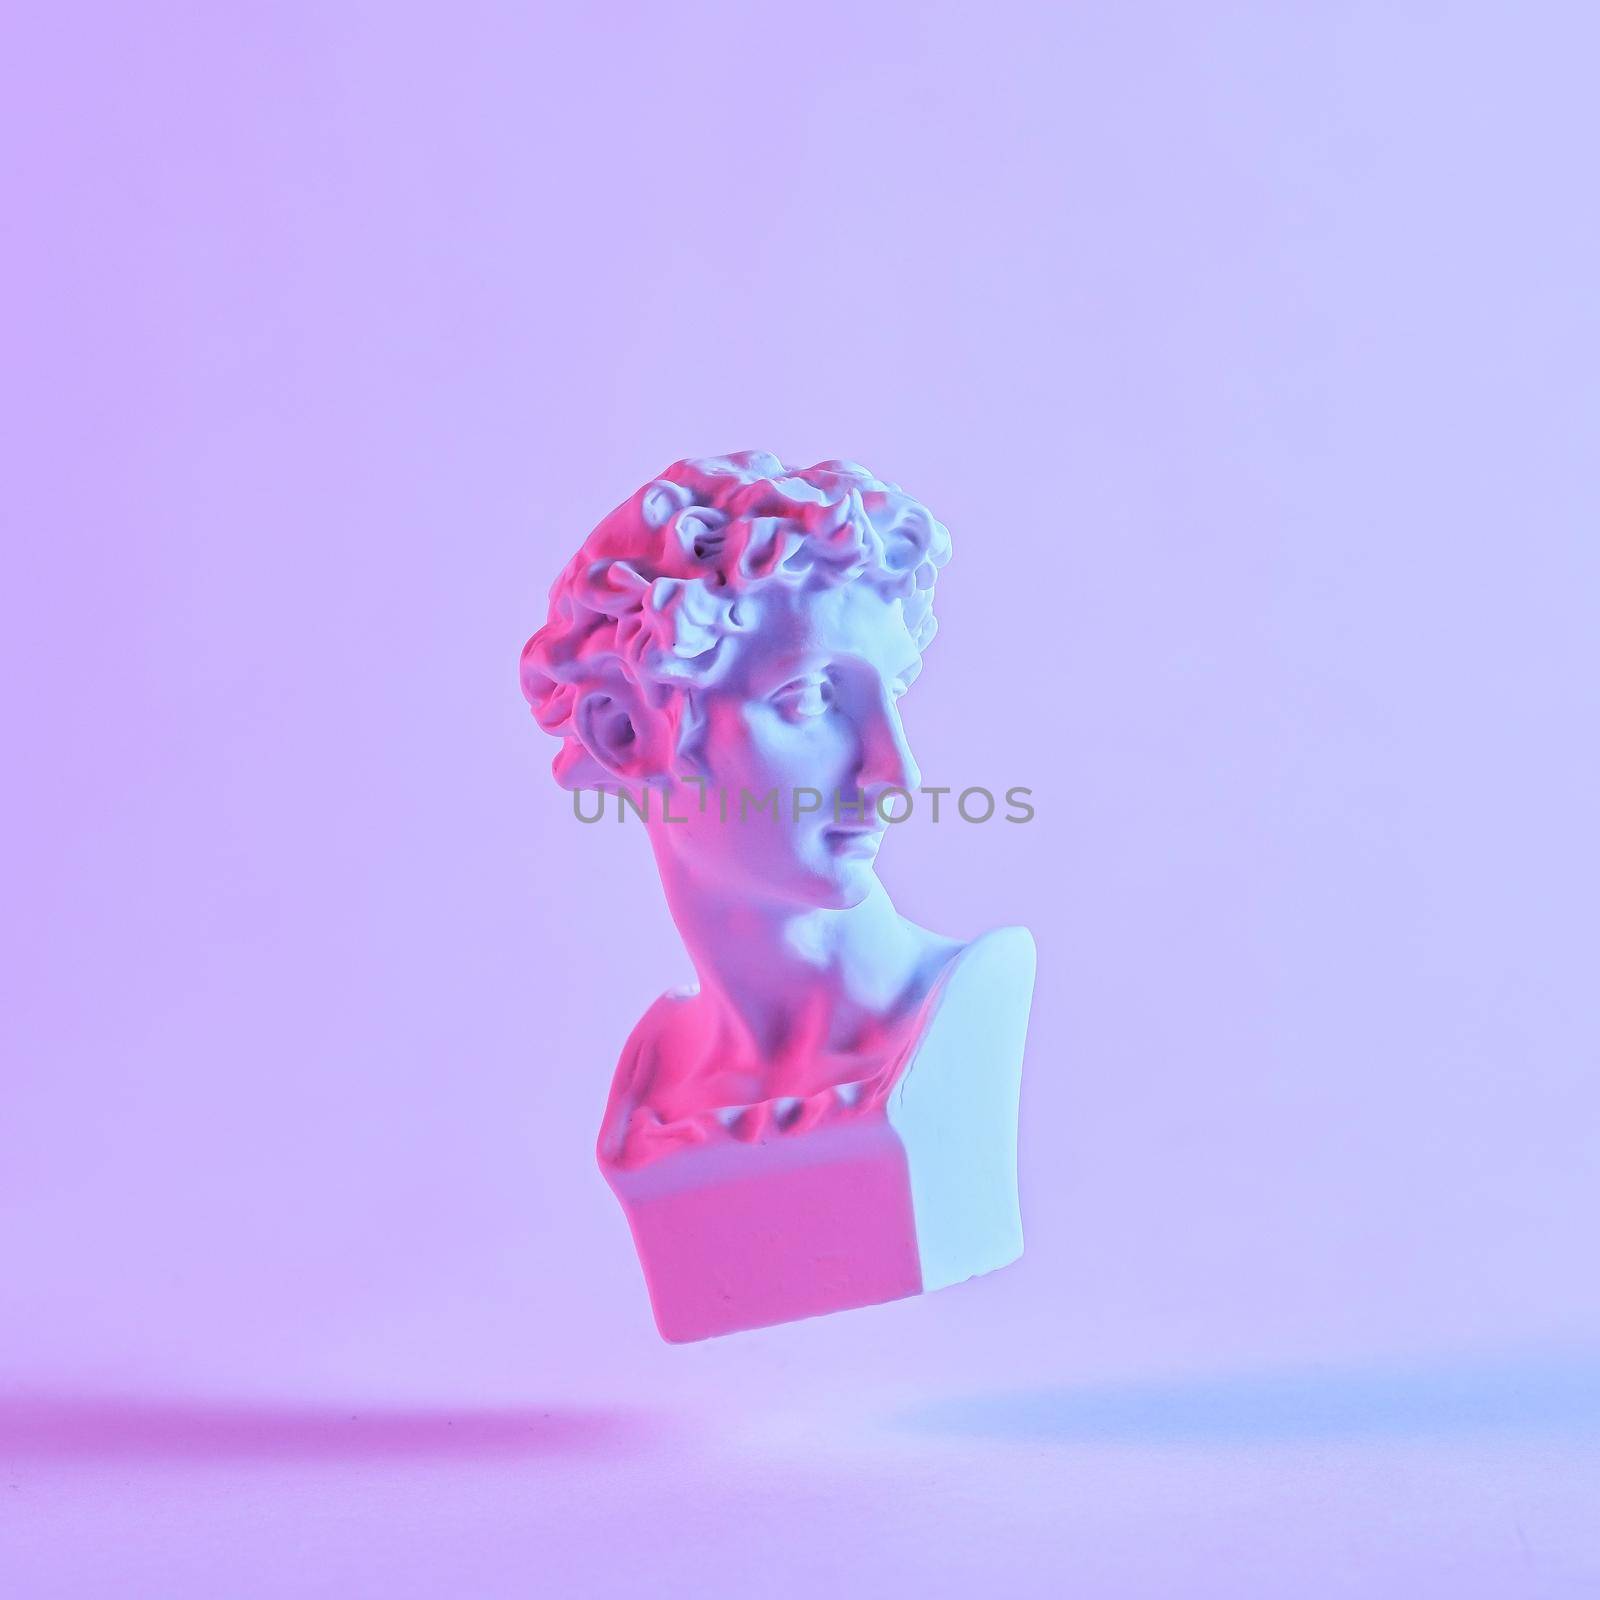 Monotone purple still life of a floating antique style Roman or Grecian bust with drop shadow in square format